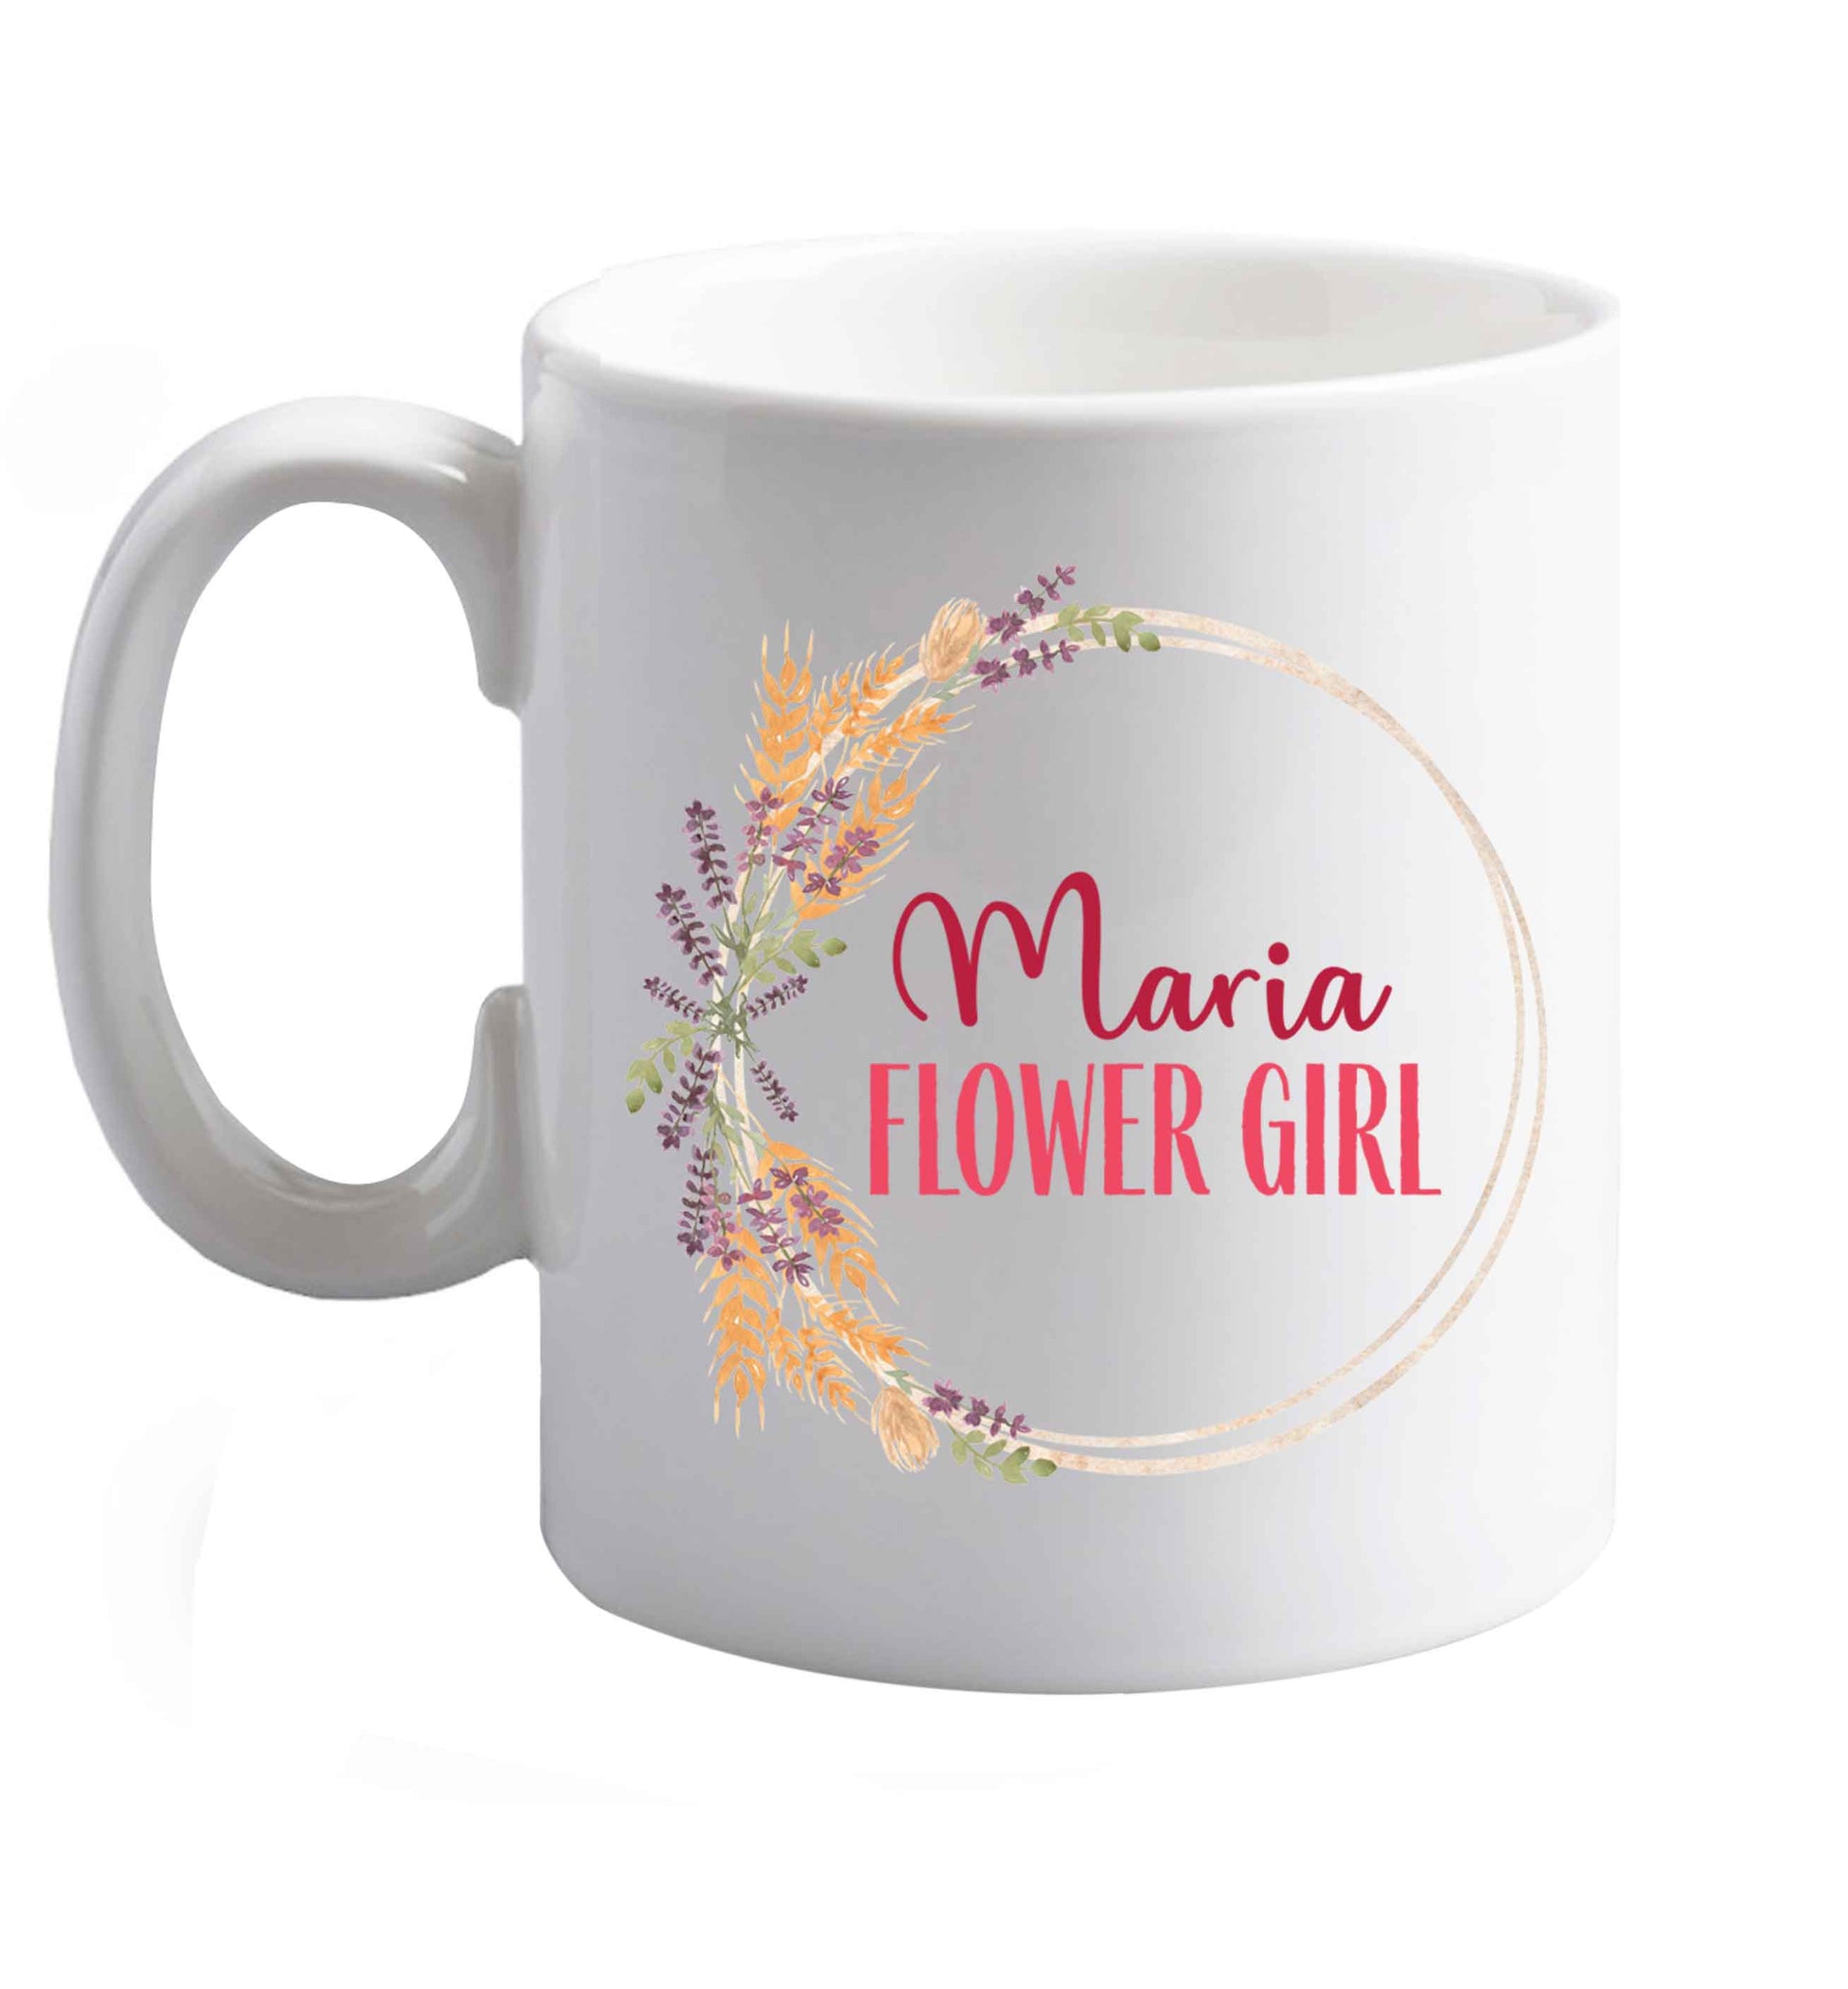 10 oz Perfect wedding guest favours or hen party gifts! Personalised bridal floral wreath designs, any name, any role!   ceramic mug right handed